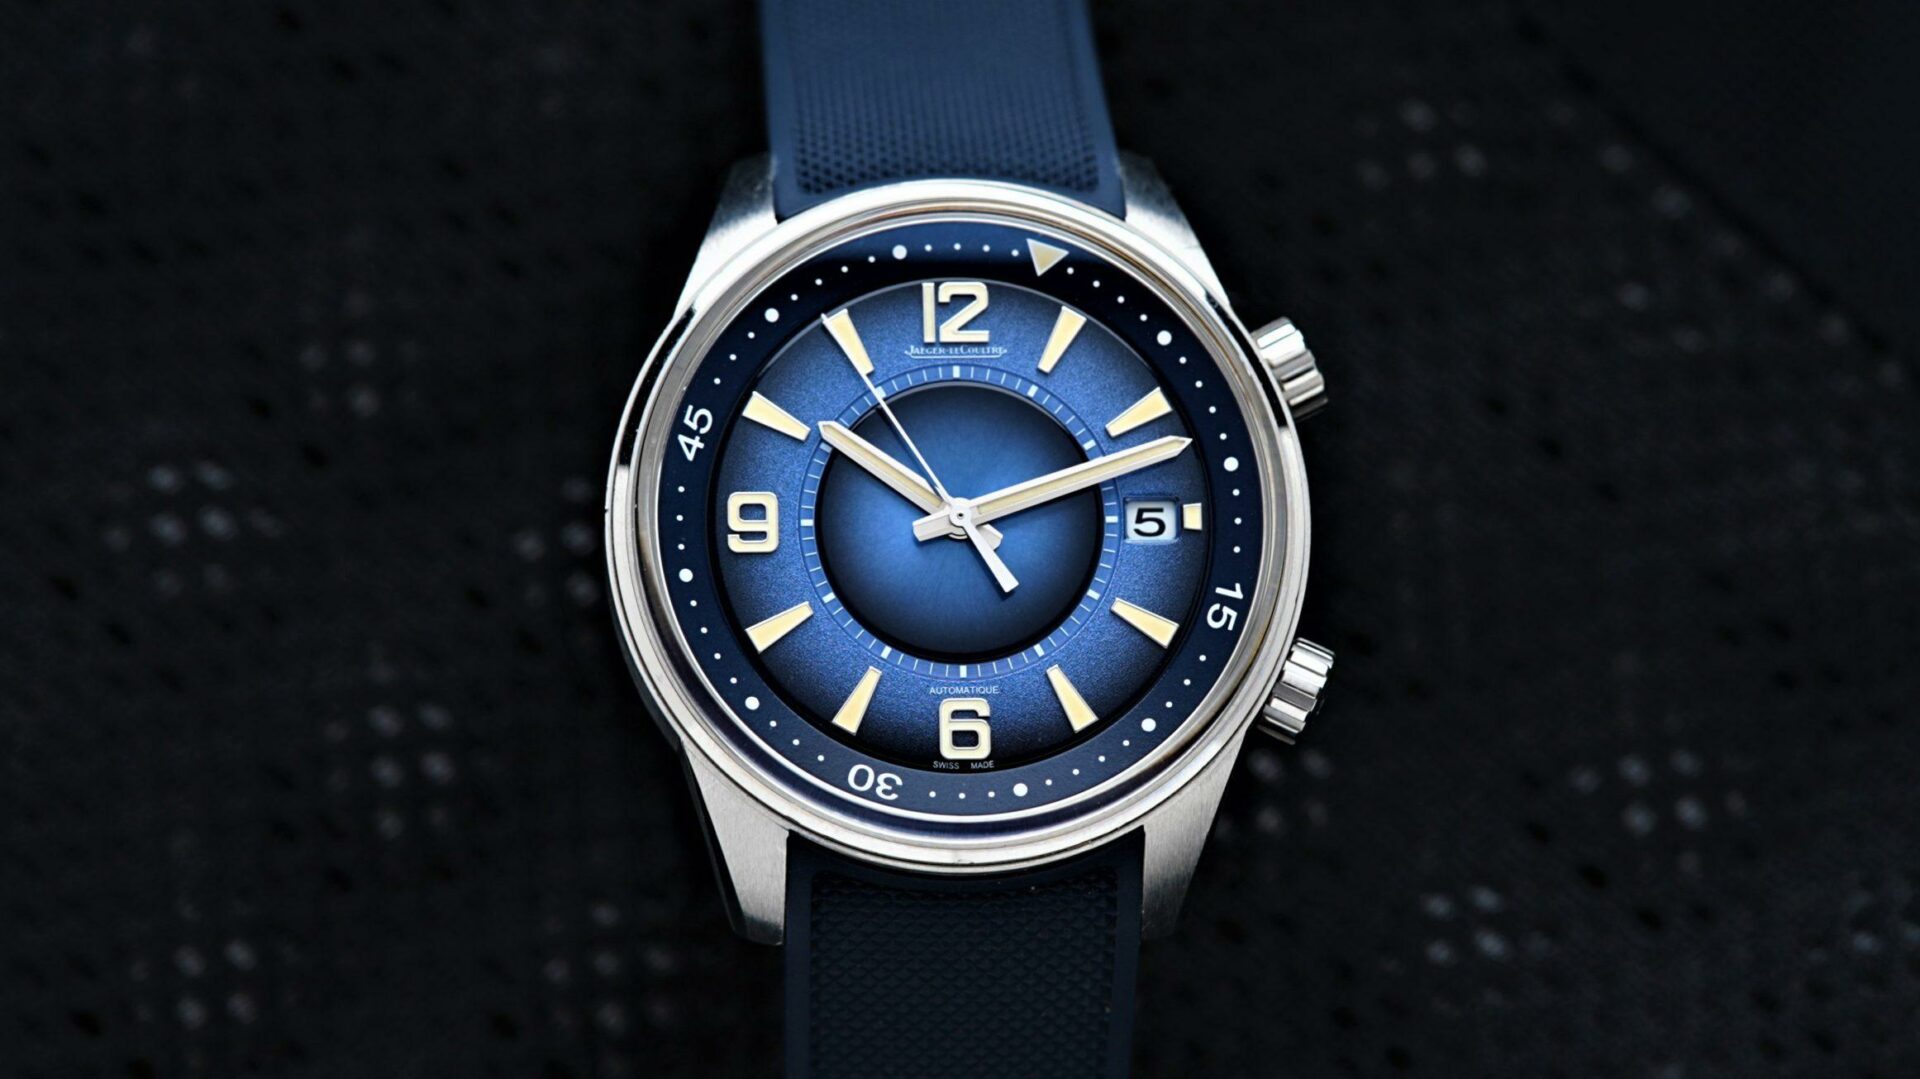 Jaeger-LeCoultre Polaris Limited Stunning Blue Dial watch featured under white lighting.